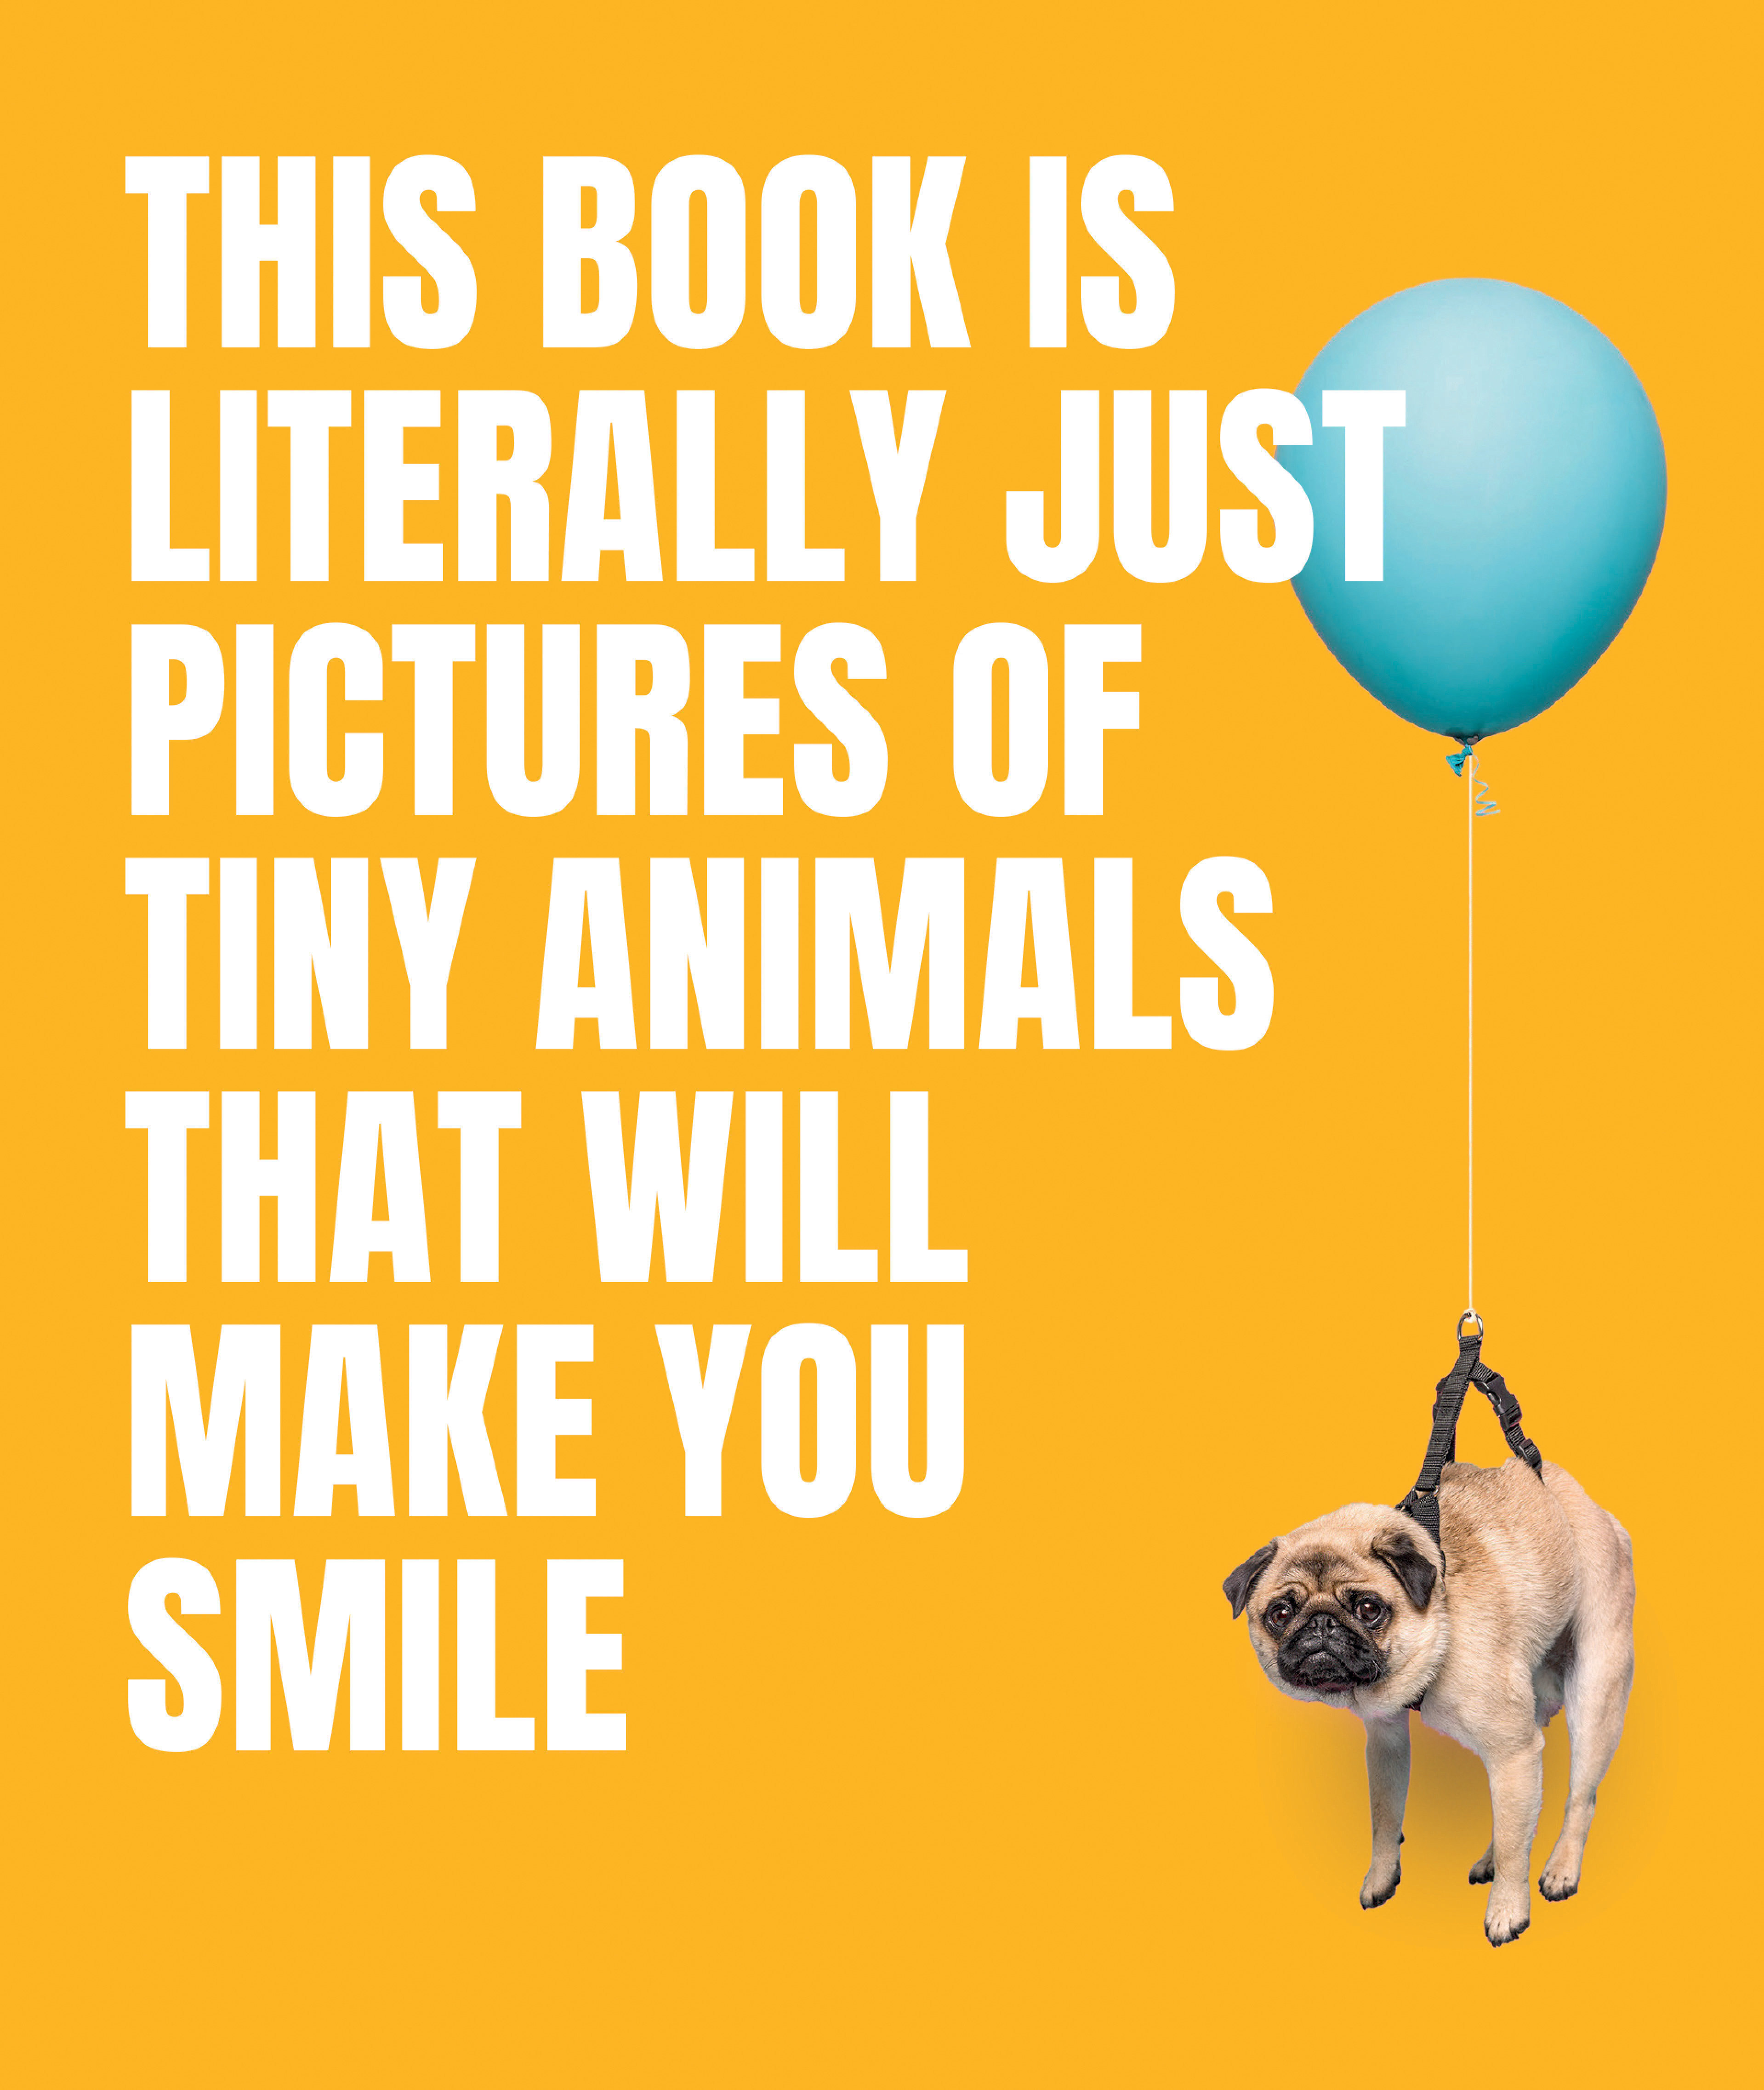 This Book Is Literally Just Pictures Of Tiny Animals That Will Make You Smile (Hardcover Book)